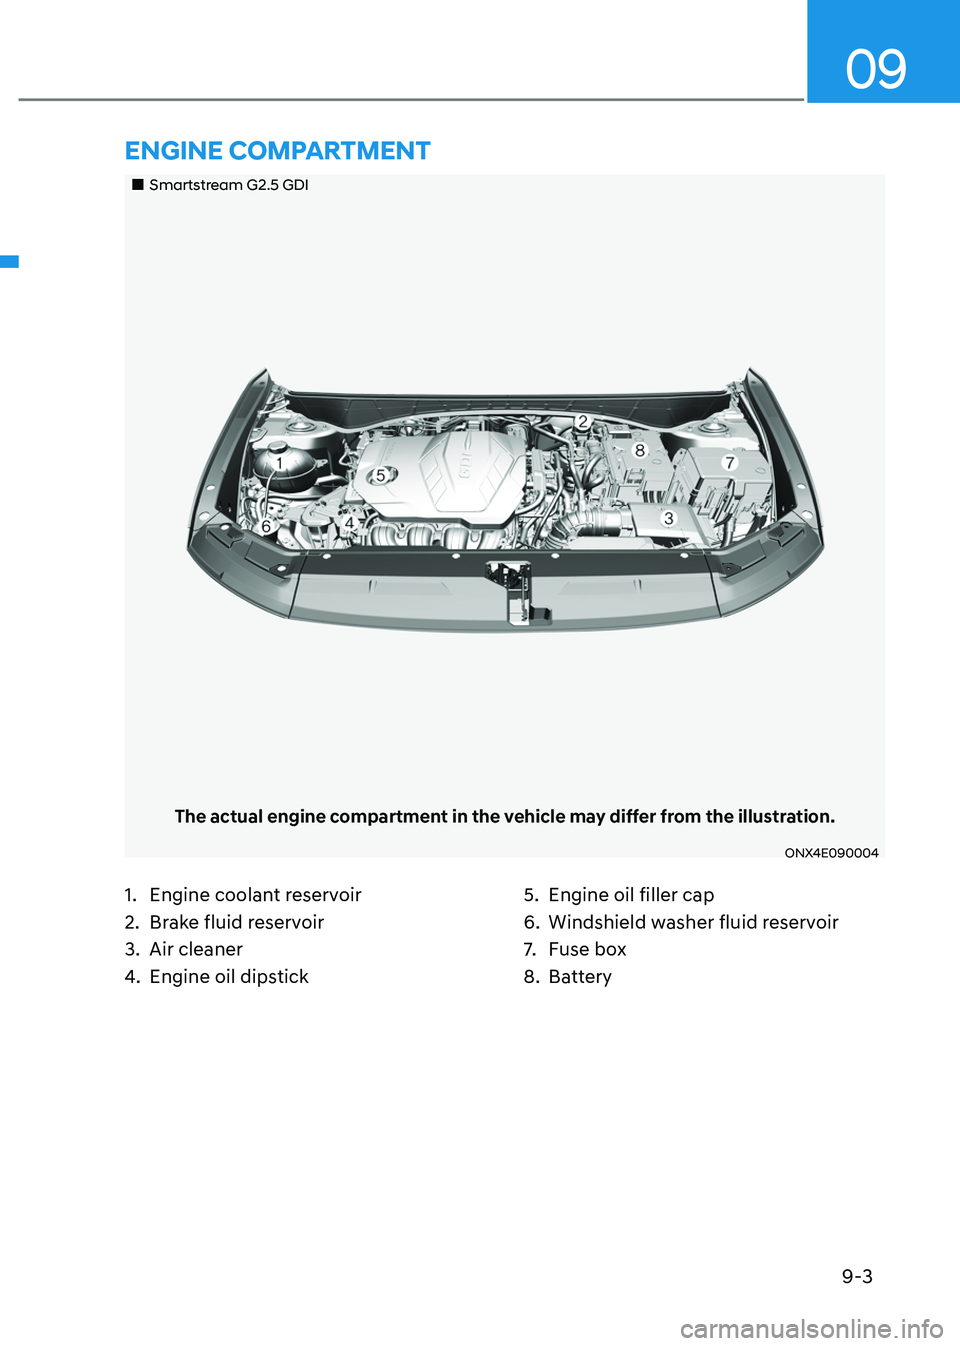 HYUNDAI TUCSON 2022 User Guide 9-3
09
„„Smartstream G2.5 GDI
The actual engine compartment in the vehicle may differ from the illustration.
ONX4E090004
1. Engine coolant reservoir 
2. Brake fluid reservoir 
3. Air cleaner